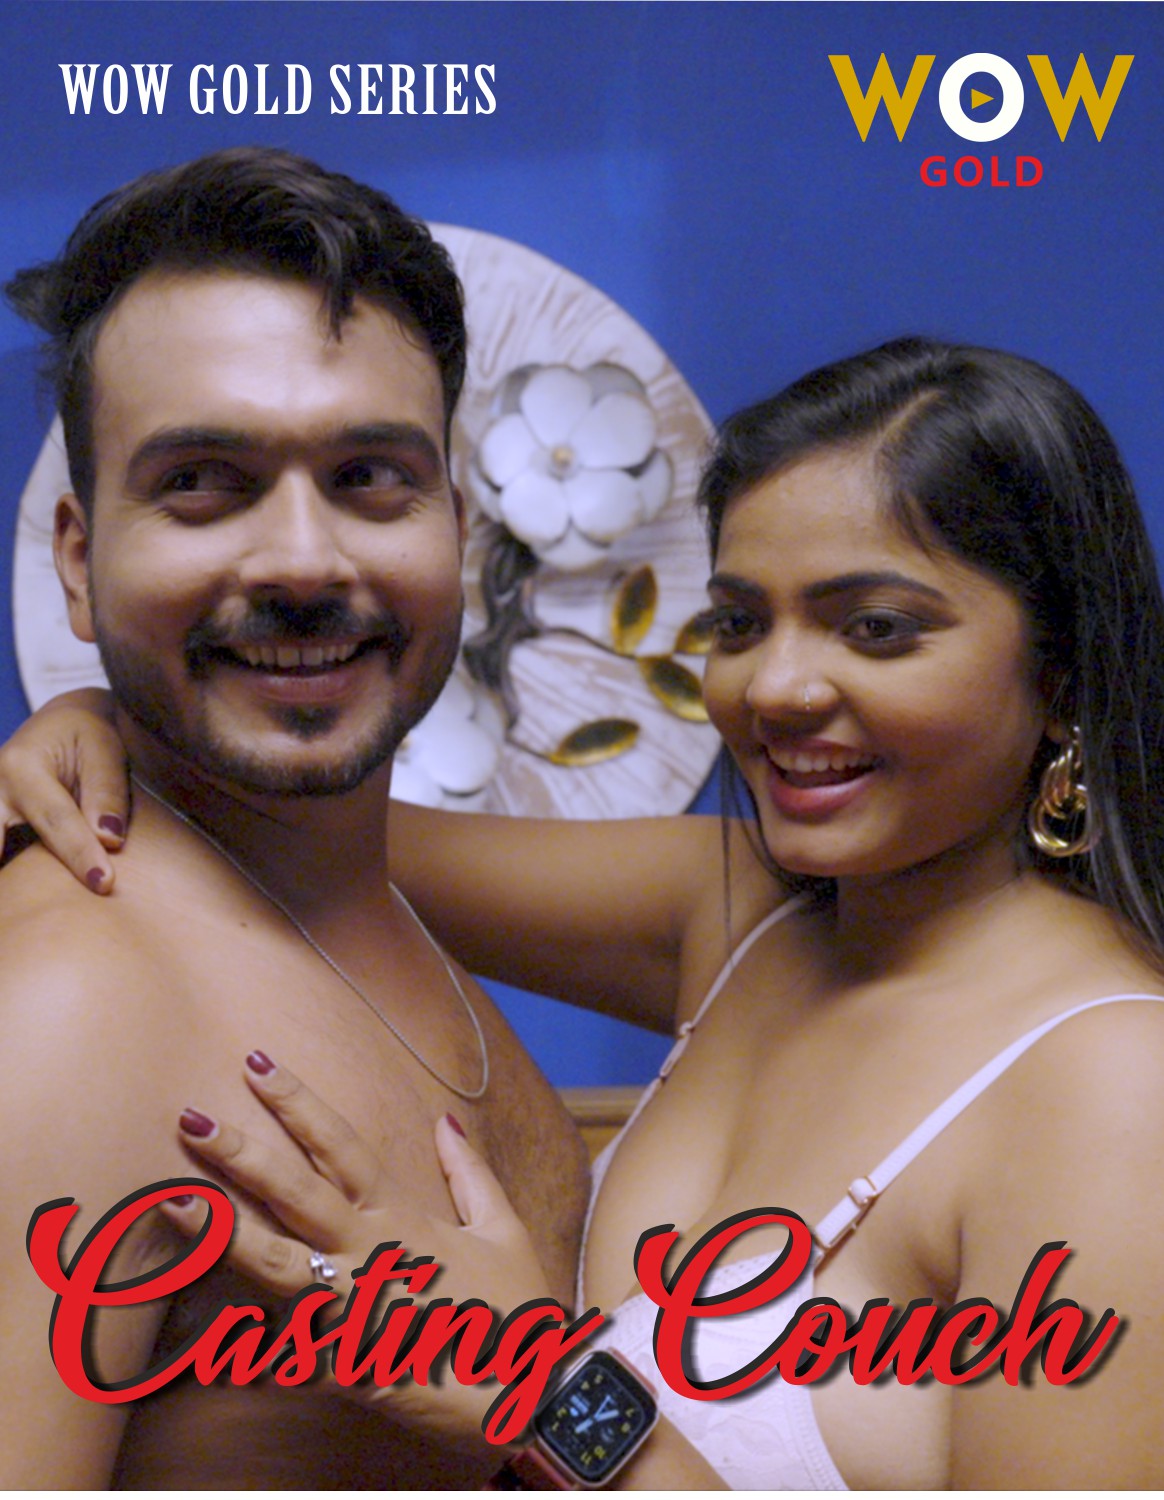 18+ Casting Couch 2023 S01E01-02 Hindi WowGold Web Series 720p HDRip 250MB Download